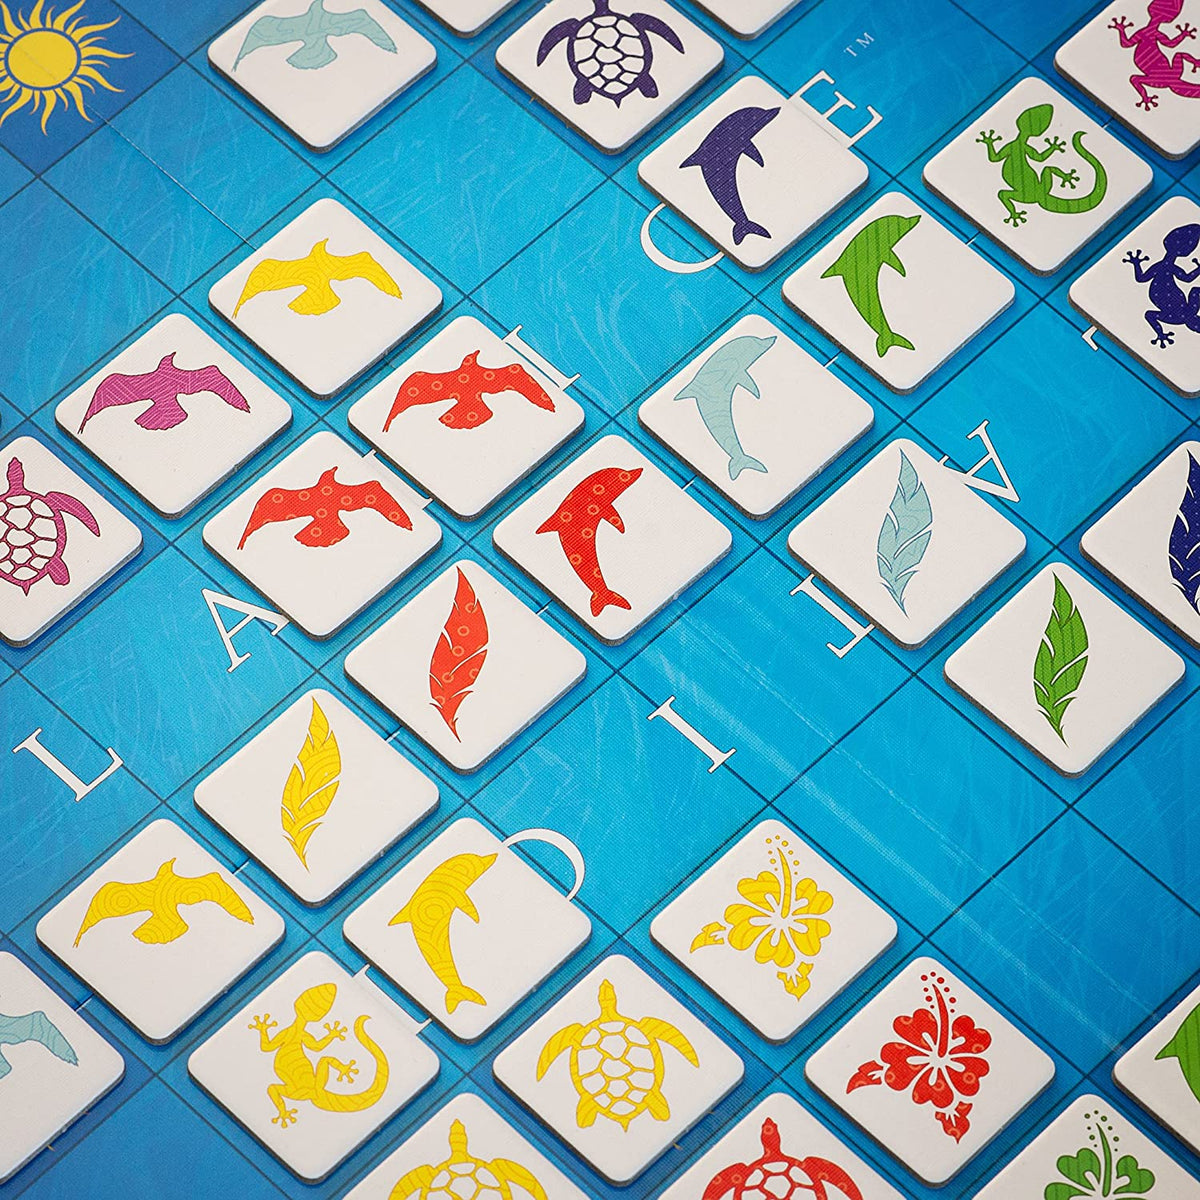 Latice Strategy Board Game - the Popular New Family Board Game for Kids and Adults, Challenging Fun for Everyone